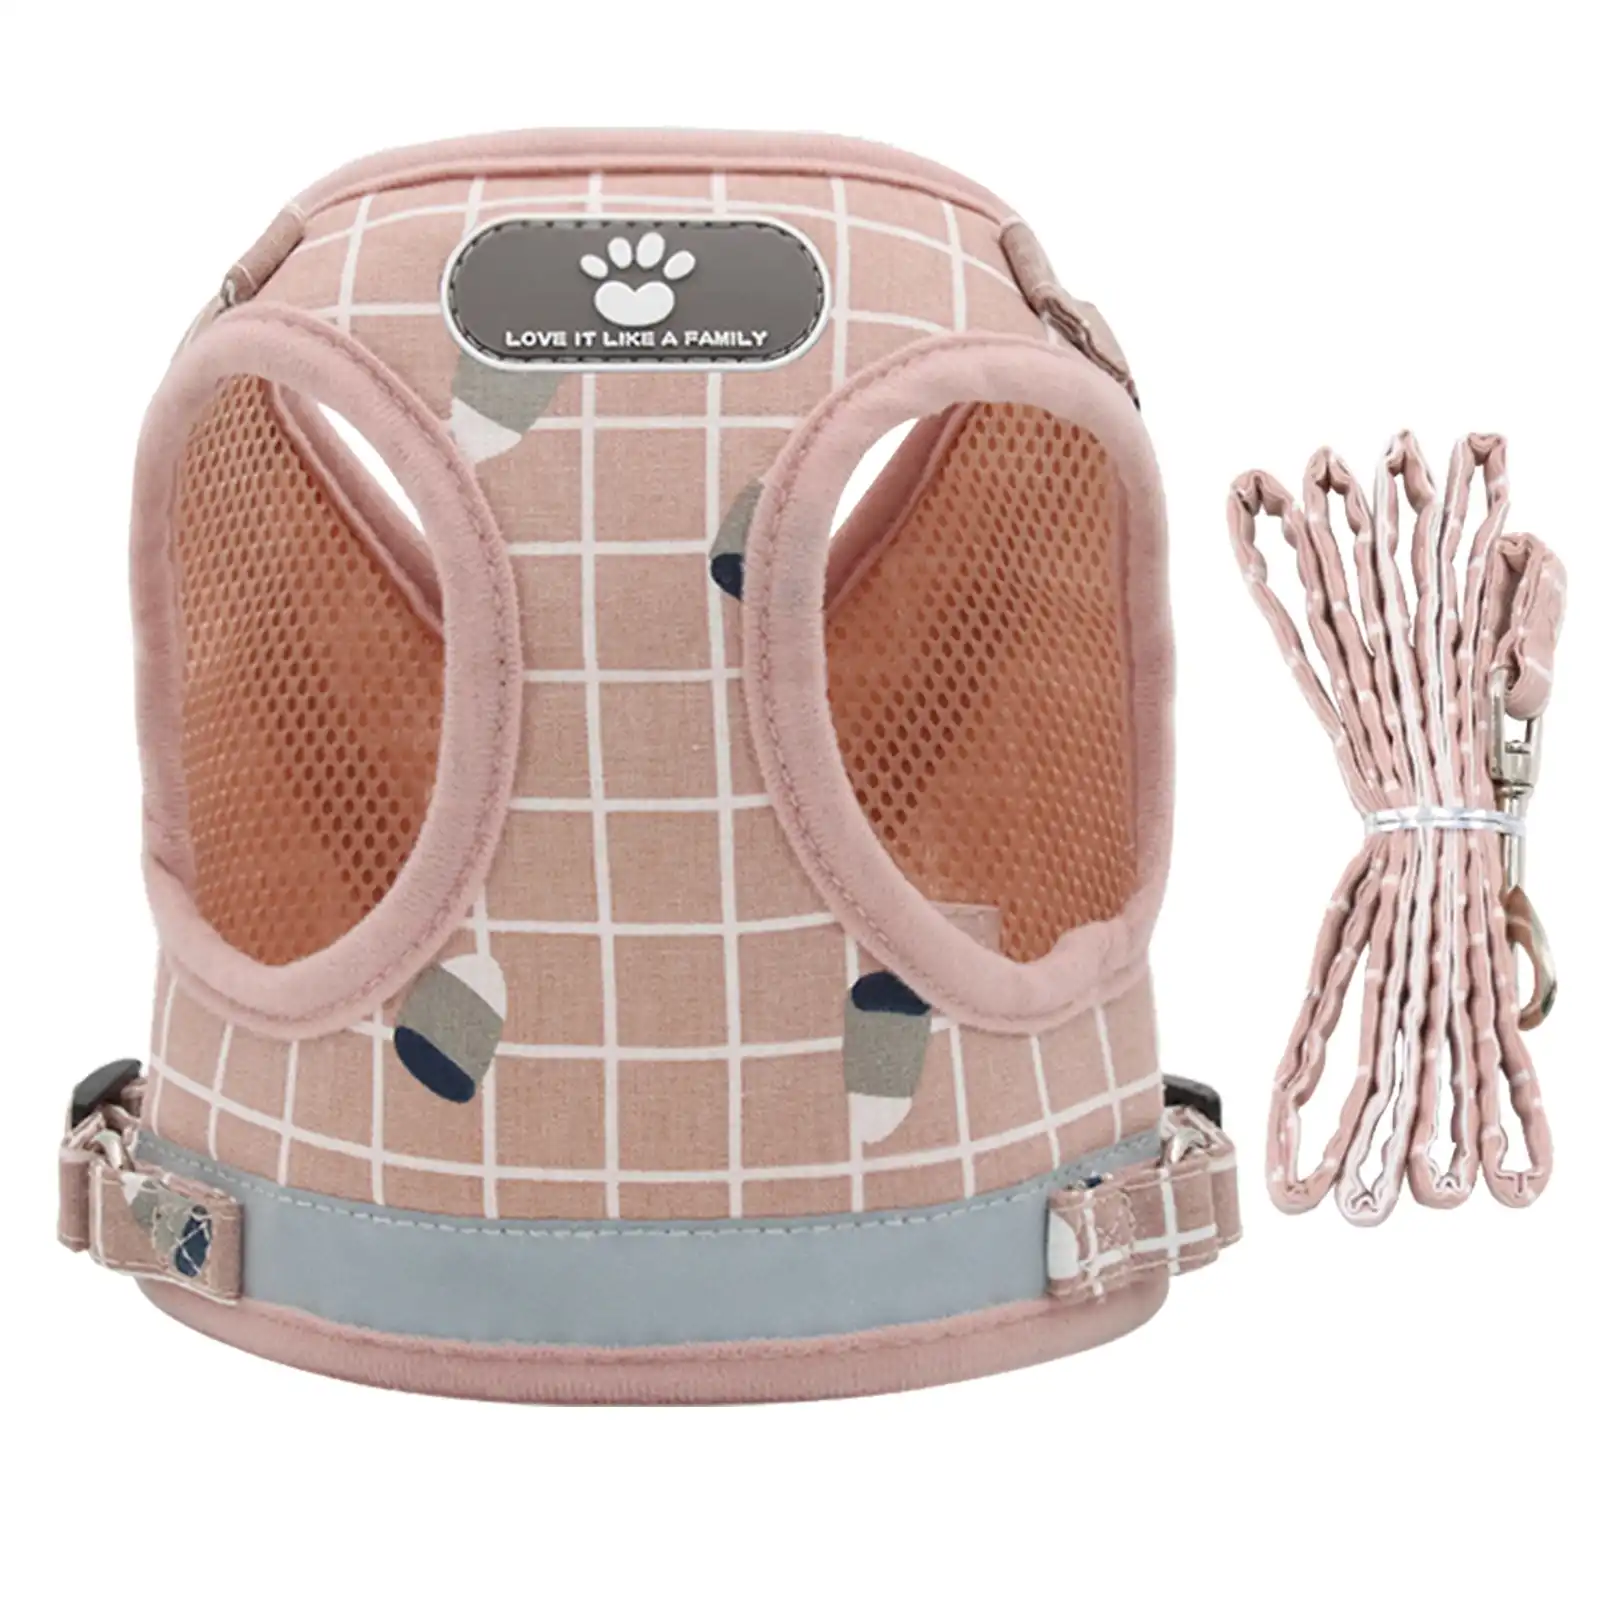 Furbulous No Pull Cat Small Dog Harness and Lead Set Adjustable Reflective Step-in Vest Harnesses Mesh Padded Plaid Escape Proof Puppy Jacket - Pink L